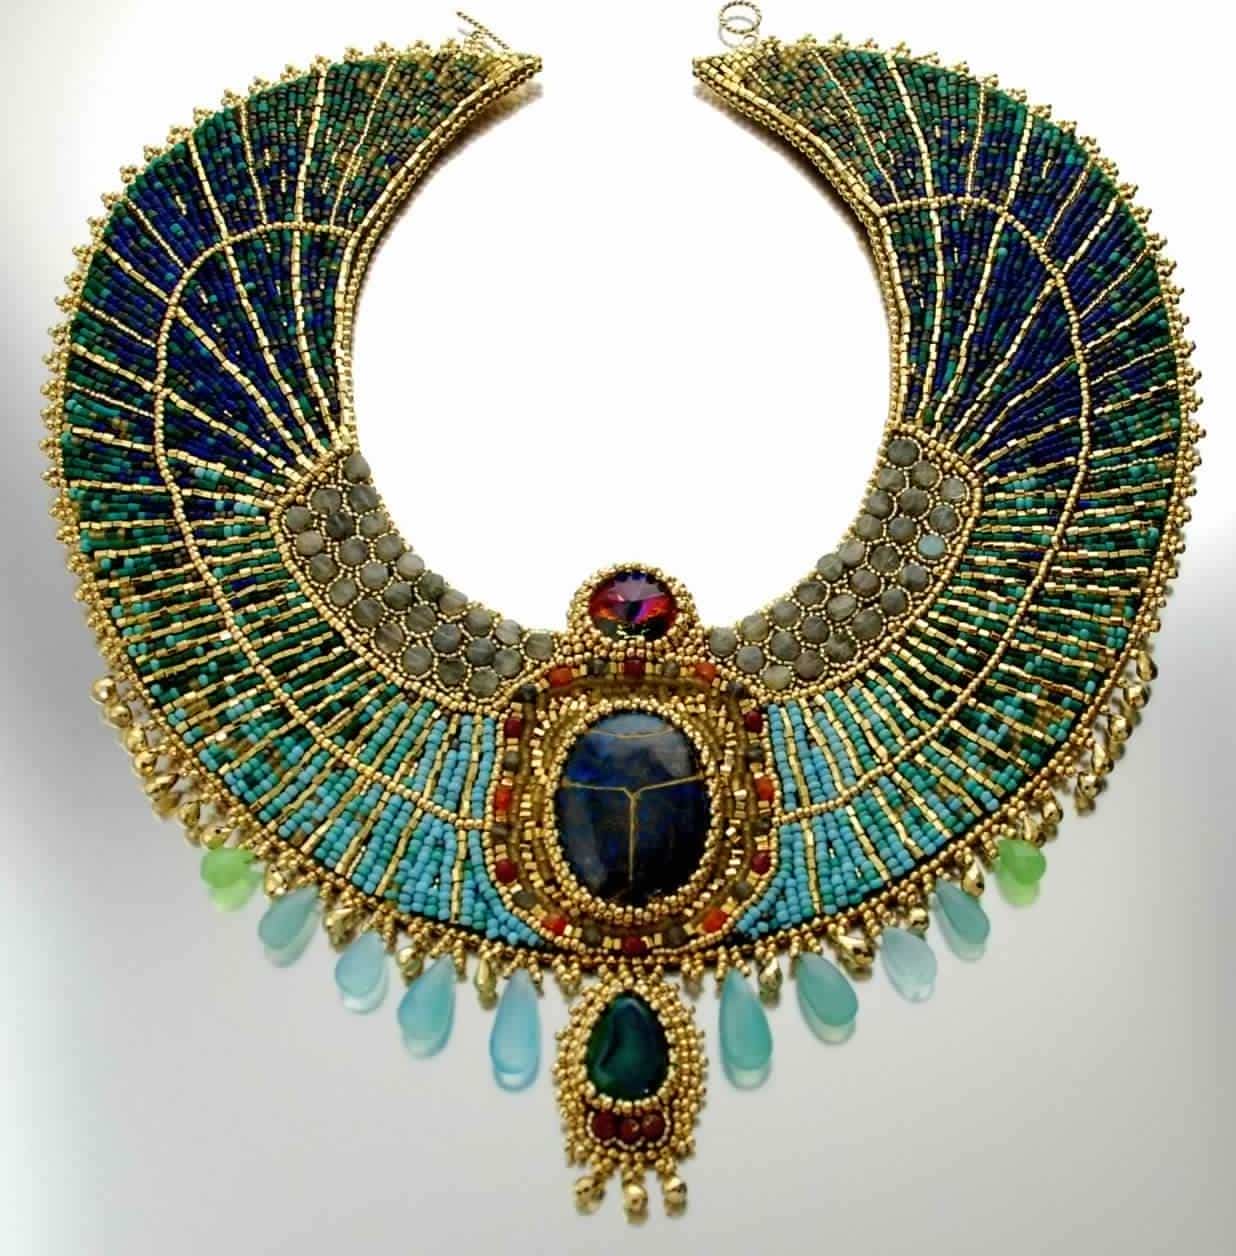 Ancient Egyptian Jewelry History and Spiritual Significance